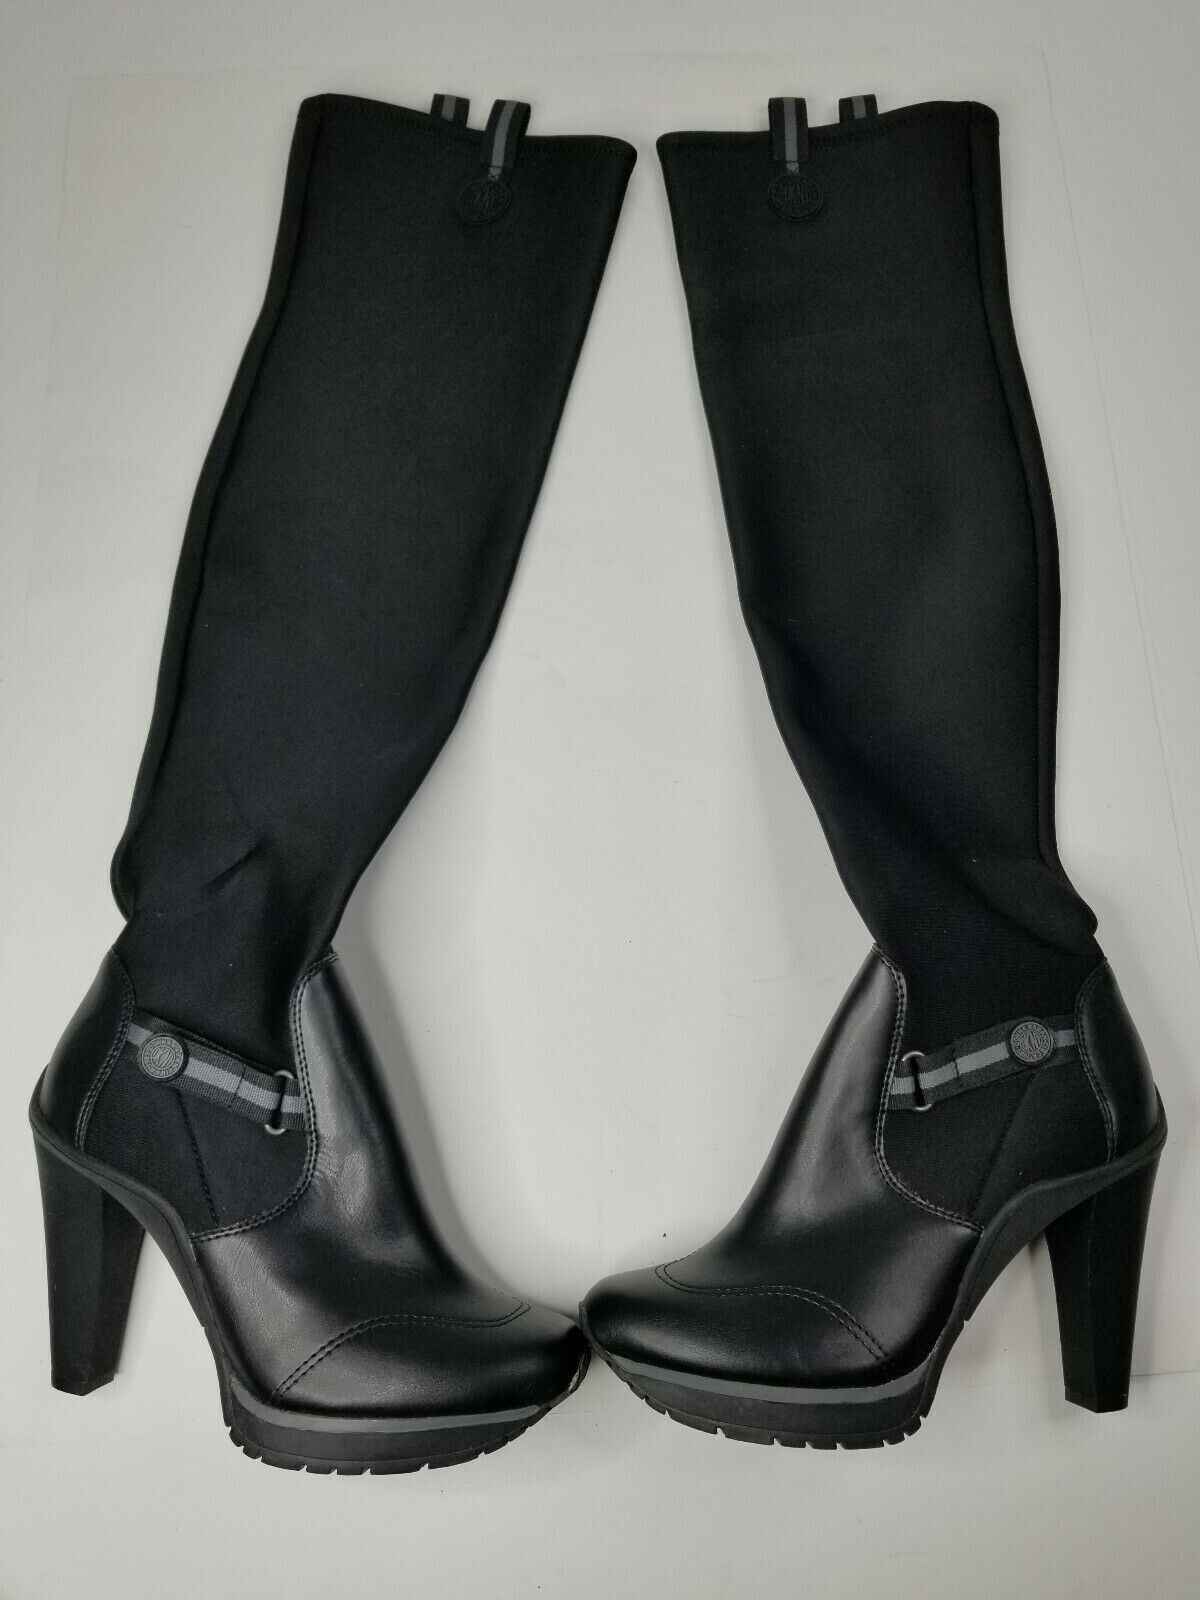 DKNY DKNY Browning Womens Black Neoprene Over-The-Knee Boots Size US 10 / EU 43 - 2 Preview